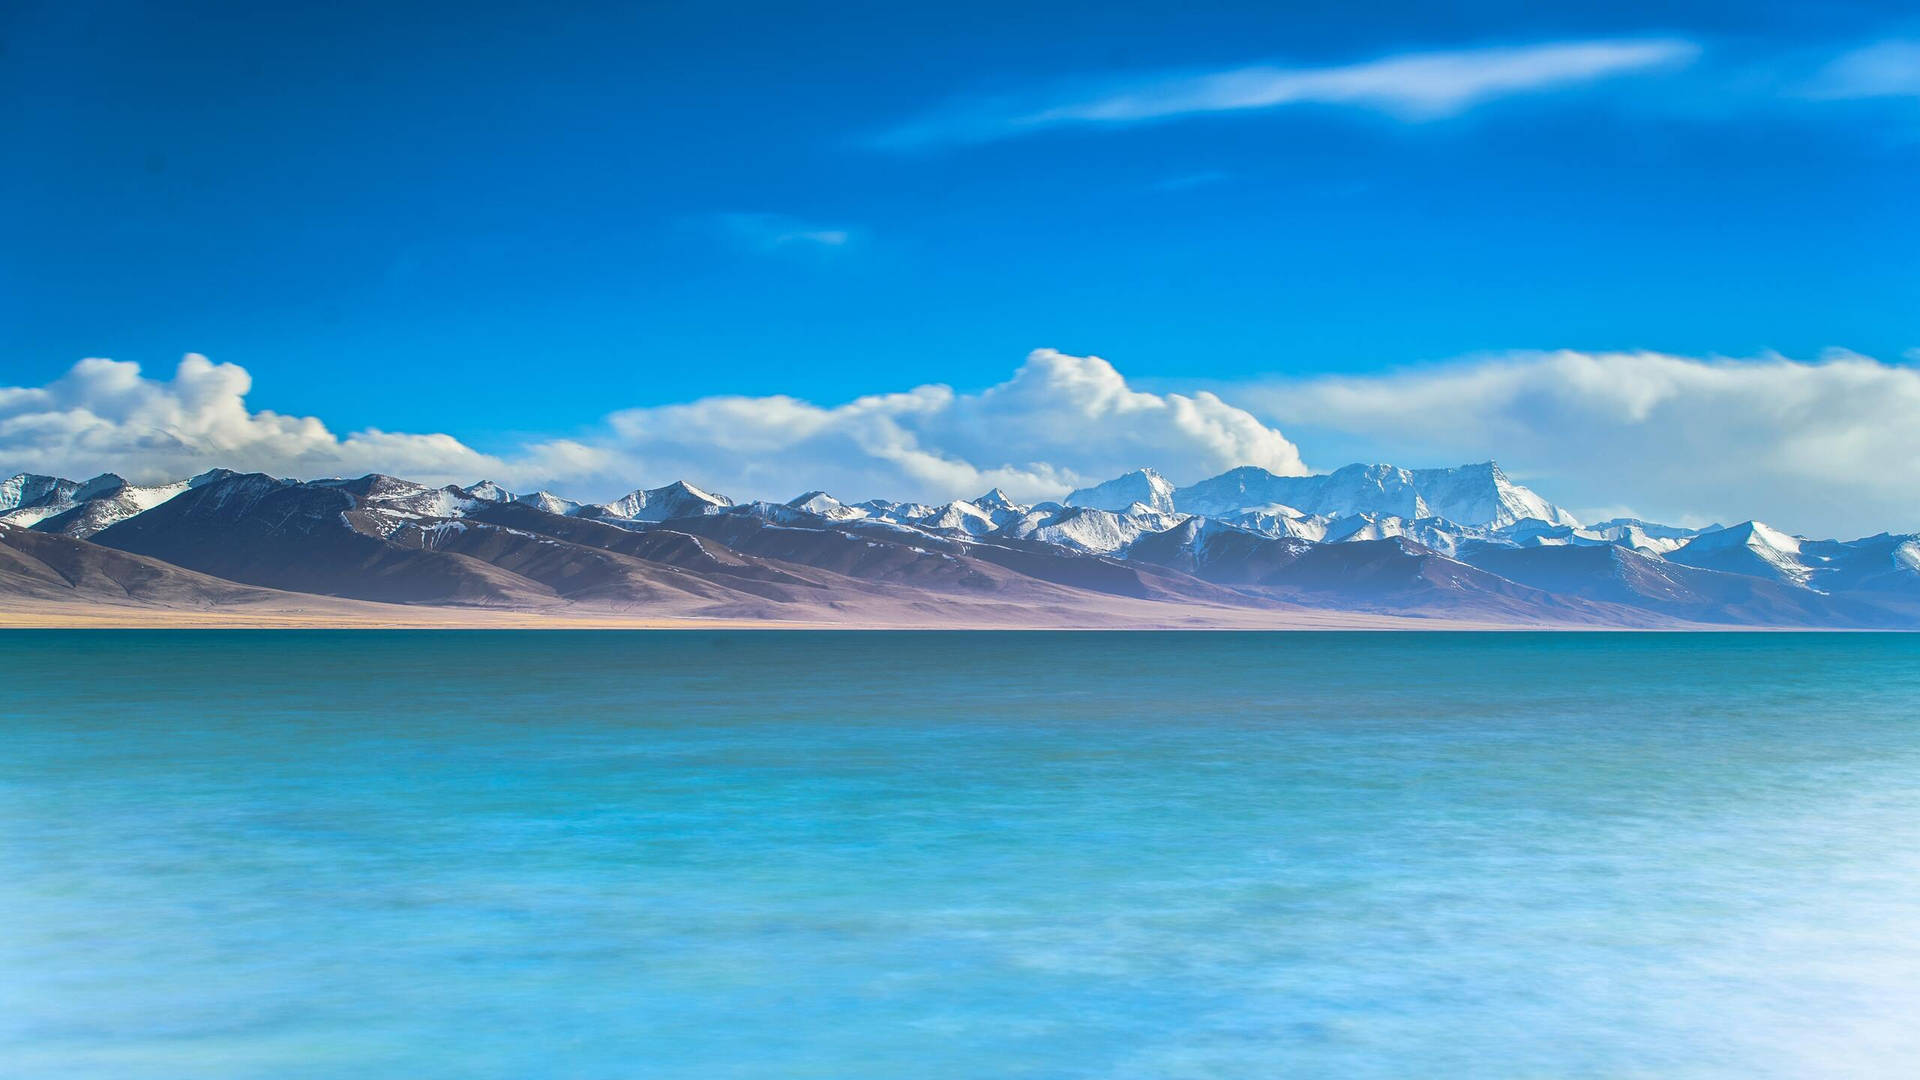 2560 X 1440 Mountain Range By The Sea Picture